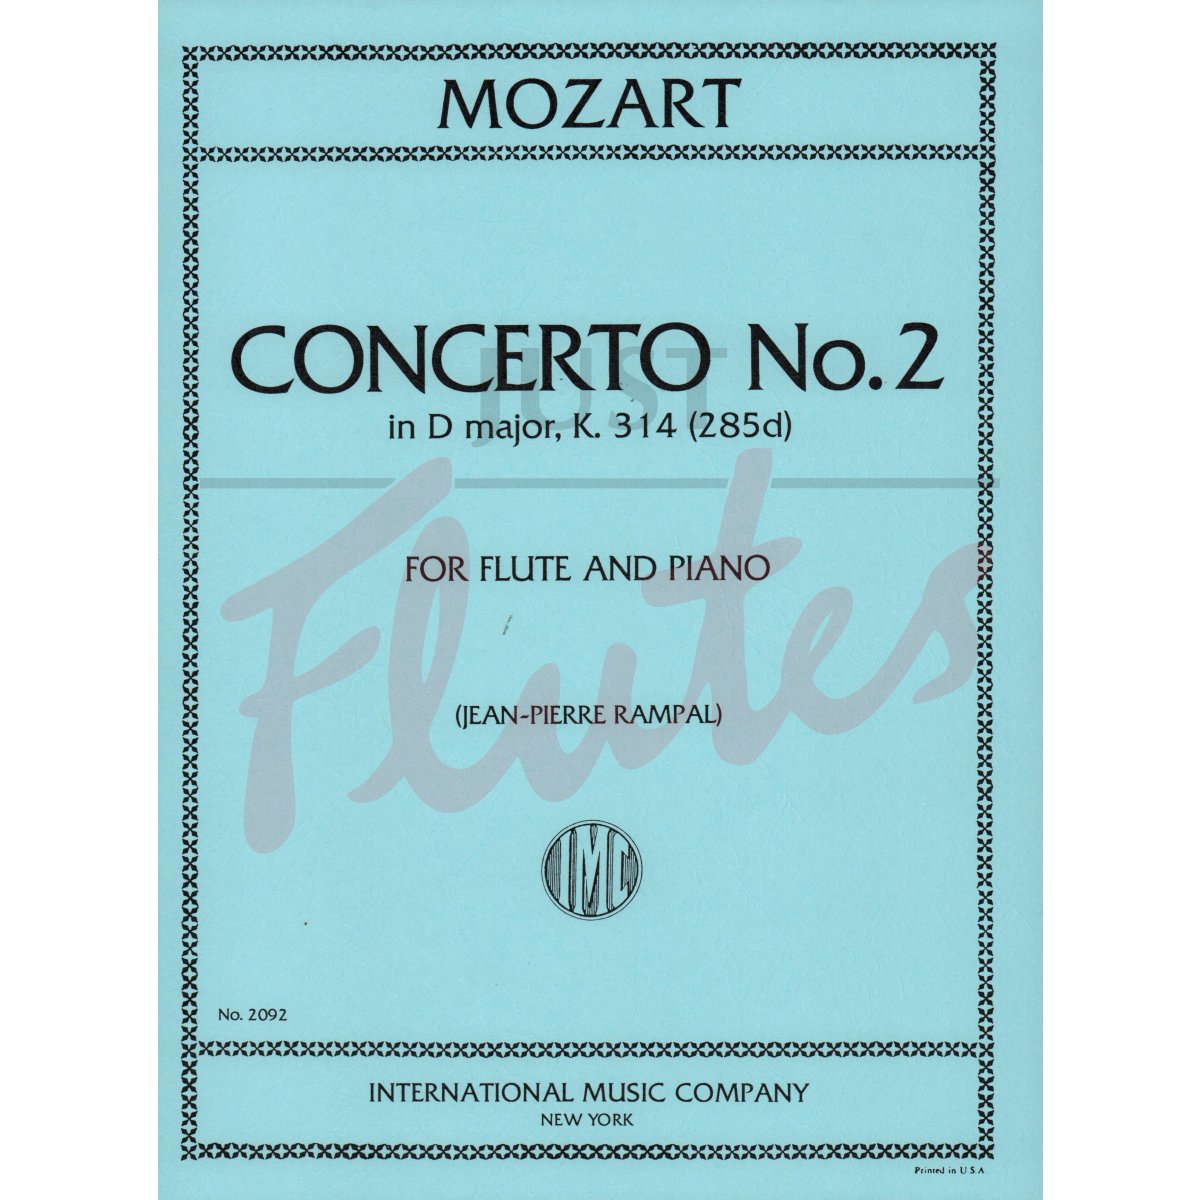 Concerto No. 2 in D major for Flute and Piano